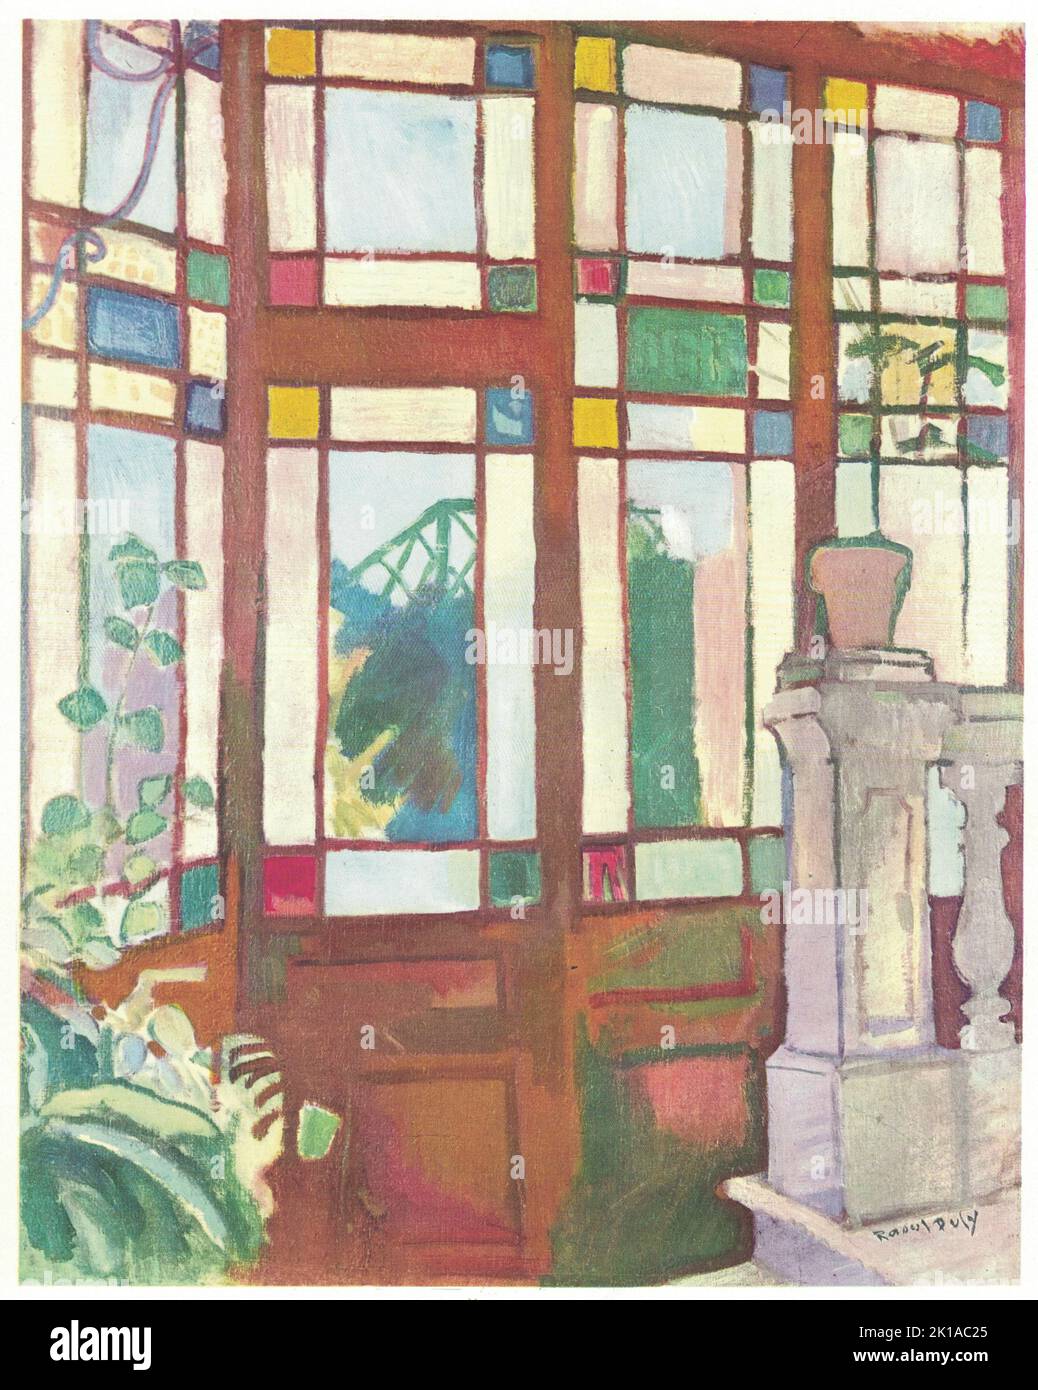 Window with coloured glasses, 1906. Painting by Raoul Dufy.  Raoul Dufy ( 3 June 1877 – 23 March 1953) was a French Fauvist painter, brother of Jean Dufy. He developed a colorful, decorative style that became fashionable for designs of ceramics and textiles, as well as decorative schemes for public buildings. He is noted for scenes of open-air social events. He was also a draftsman, printmaker, book illustrator, scenic designer, a designer of furniture, and a planner of public spaces. Stock Photo